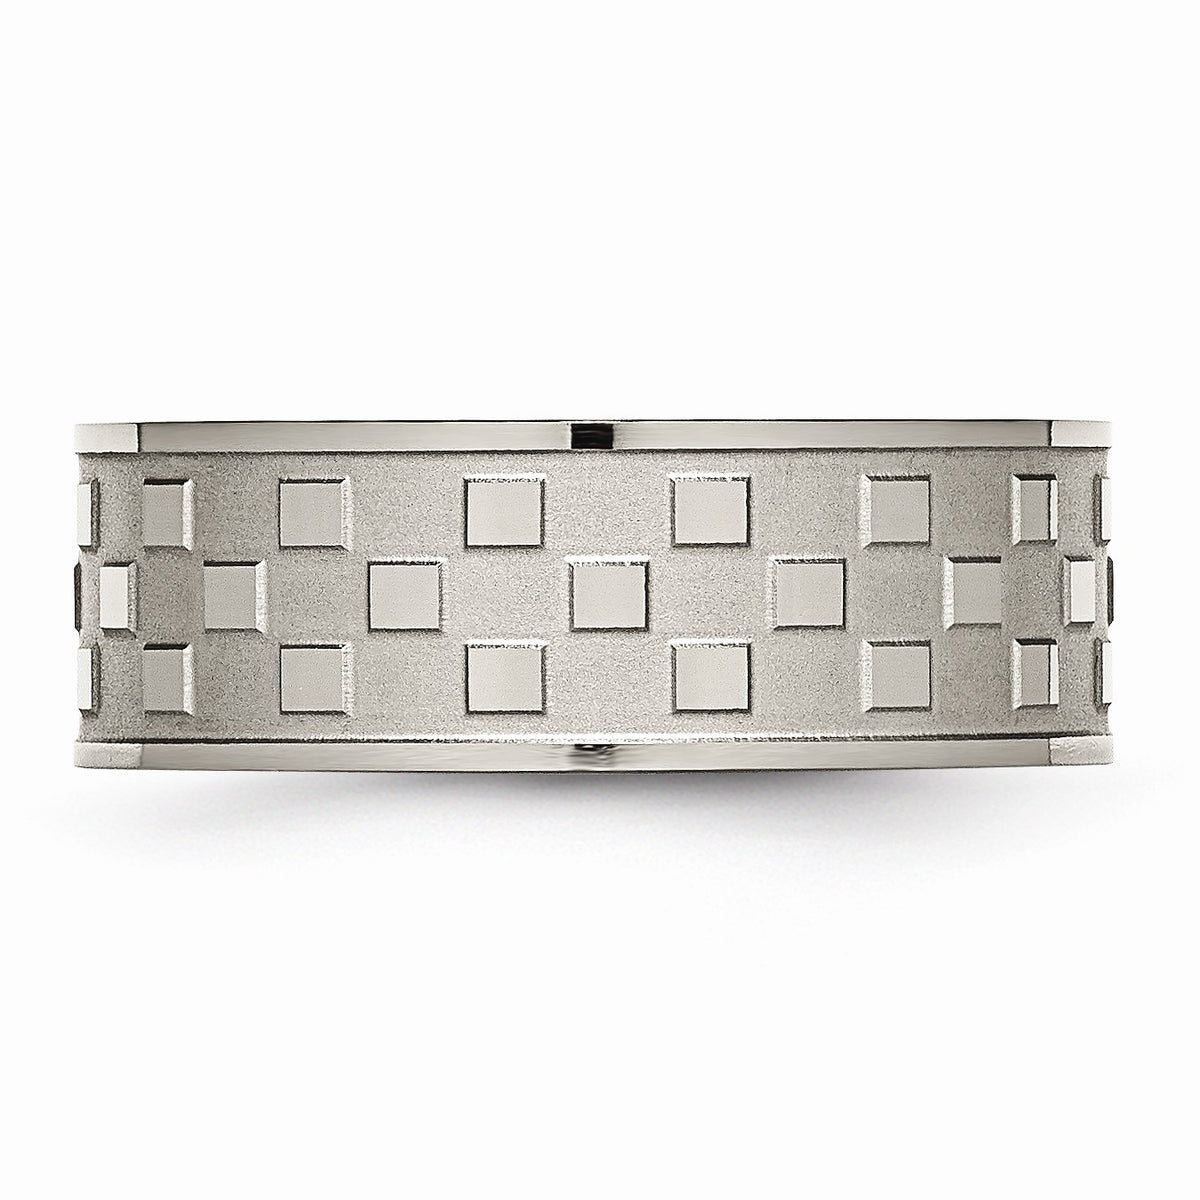 Alternate view of the Titanium 8mm Satin and Polished Checkered Comfort Fit Band by The Black Bow Jewelry Co.